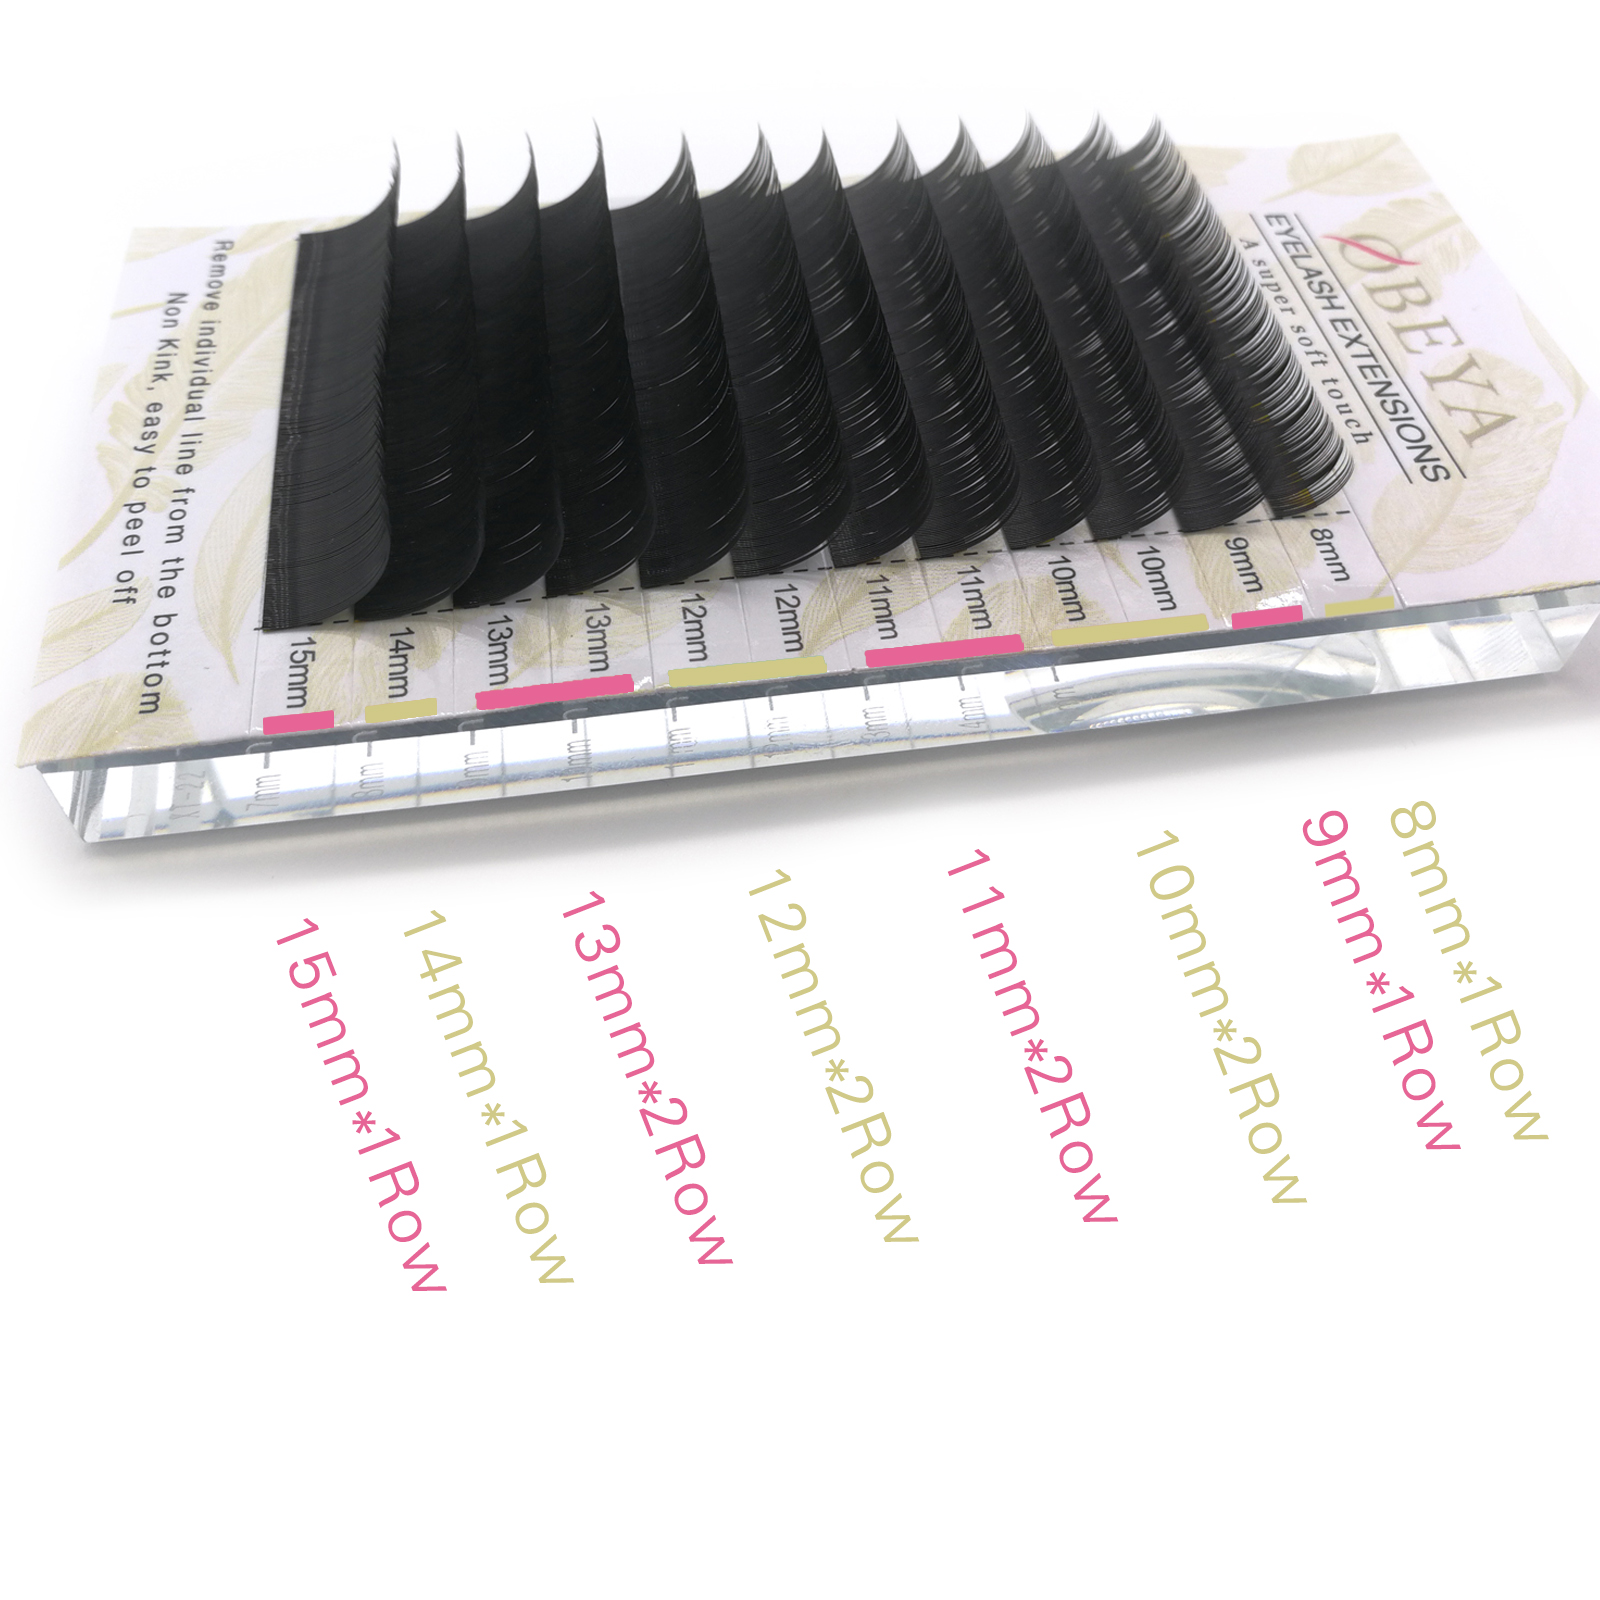 Wholesale Price Russian Volume Lash Extension 0.07 0.1 Thickness C D curl UK USA YY62